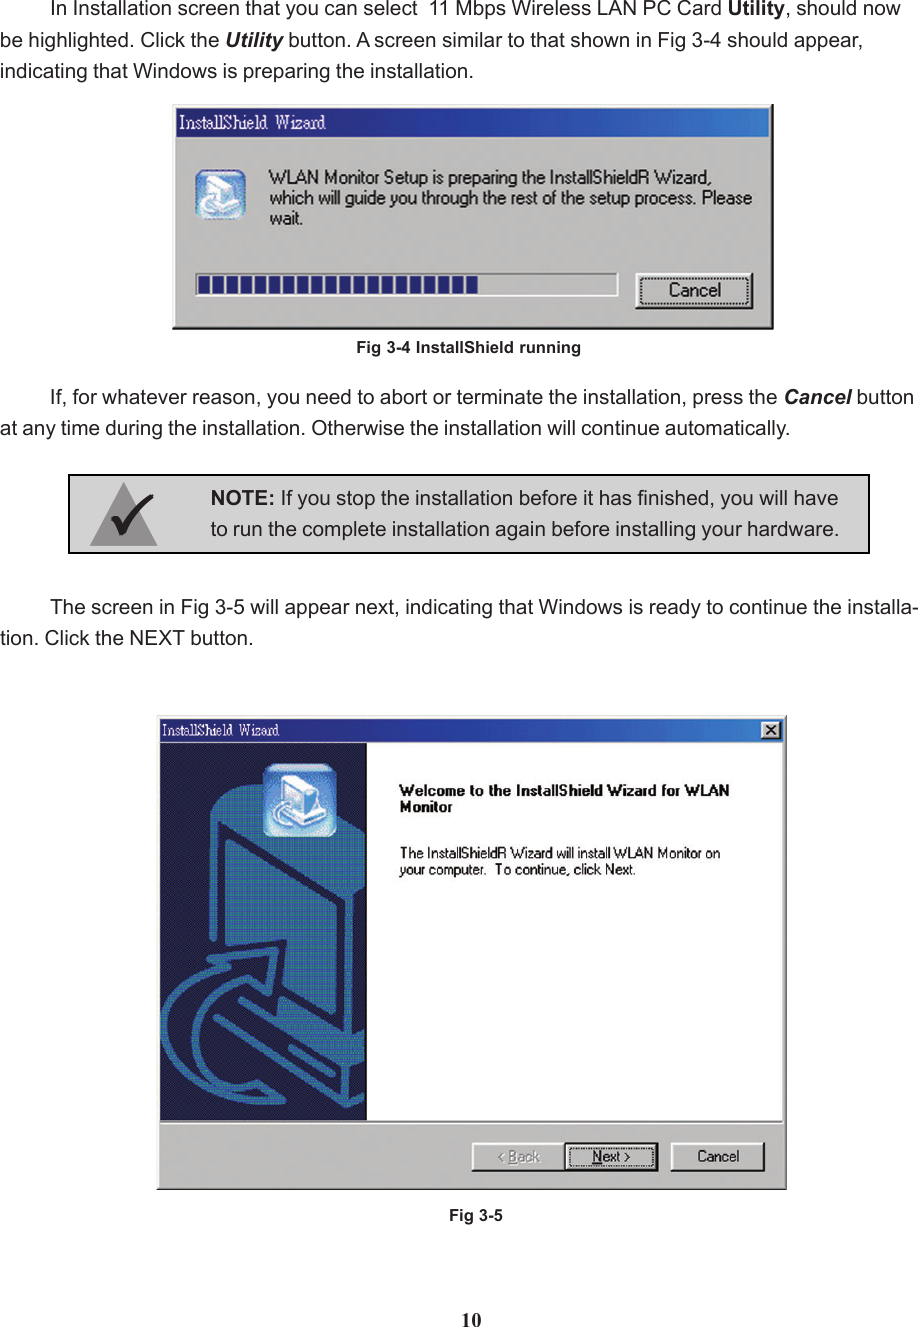 In Installation screen that you can select  11 Mbps Wireless LAN PC Card Utility, should nowbe highlighted. Click the Utility button. A screen similar to that shown in Fig 3-4 should appear,indicating that Windows is preparing the installation.If, for whatever reason, you need to abort or terminate the installation, press the Cancel buttonat any time during the installation. Otherwise the installation will continue automatically.Fig 3-4 InstallShield runningThe screen in Fig 3-5 will appear next, indicating that Windows is ready to continue the installa-tion. Click the NEXT button.10NOTE: If you stop the installation before it has finished, you will haveto run the complete installation again before installing your hardware.33333Fig 3-5